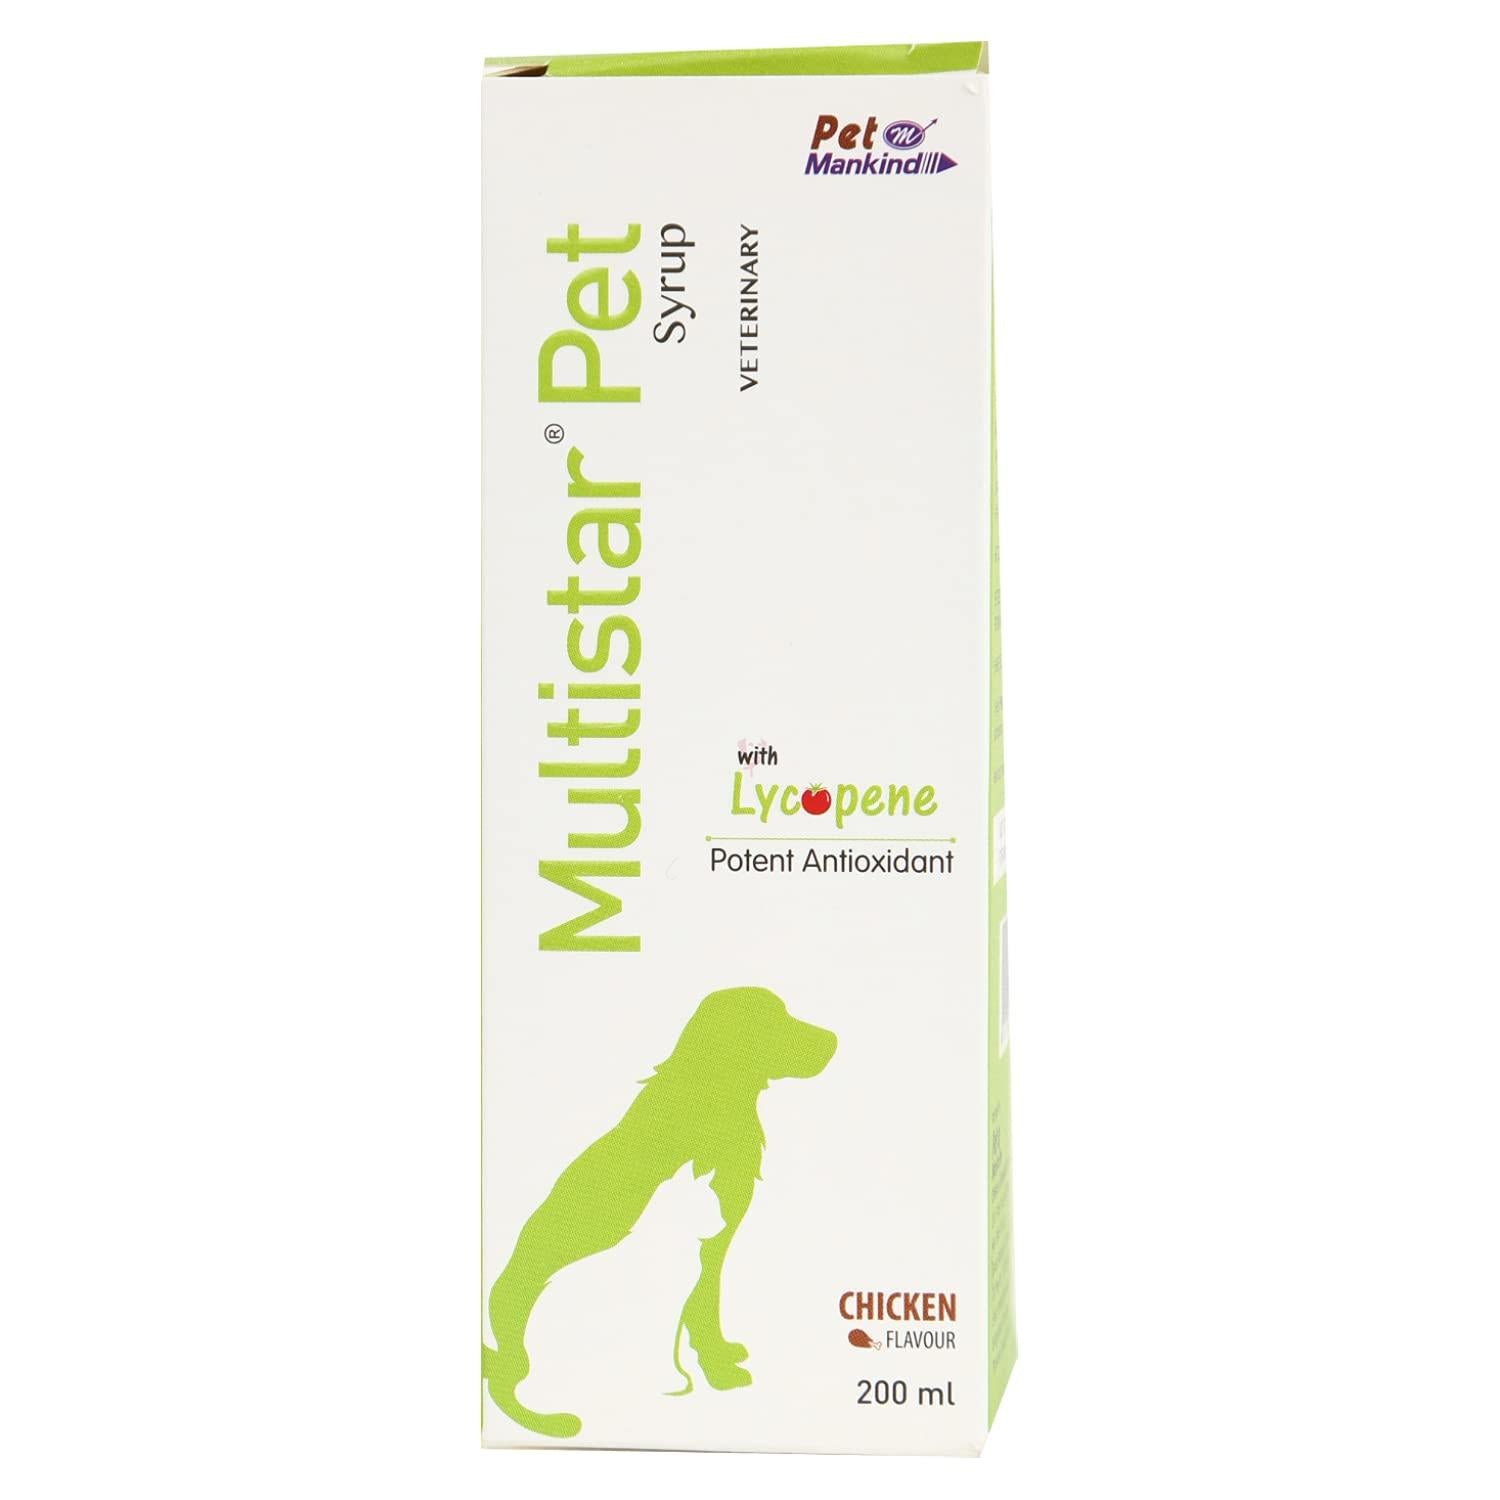 Mankind Multistar Multivitamin Syrup for Dogs & Cats 200ml – tailsnation